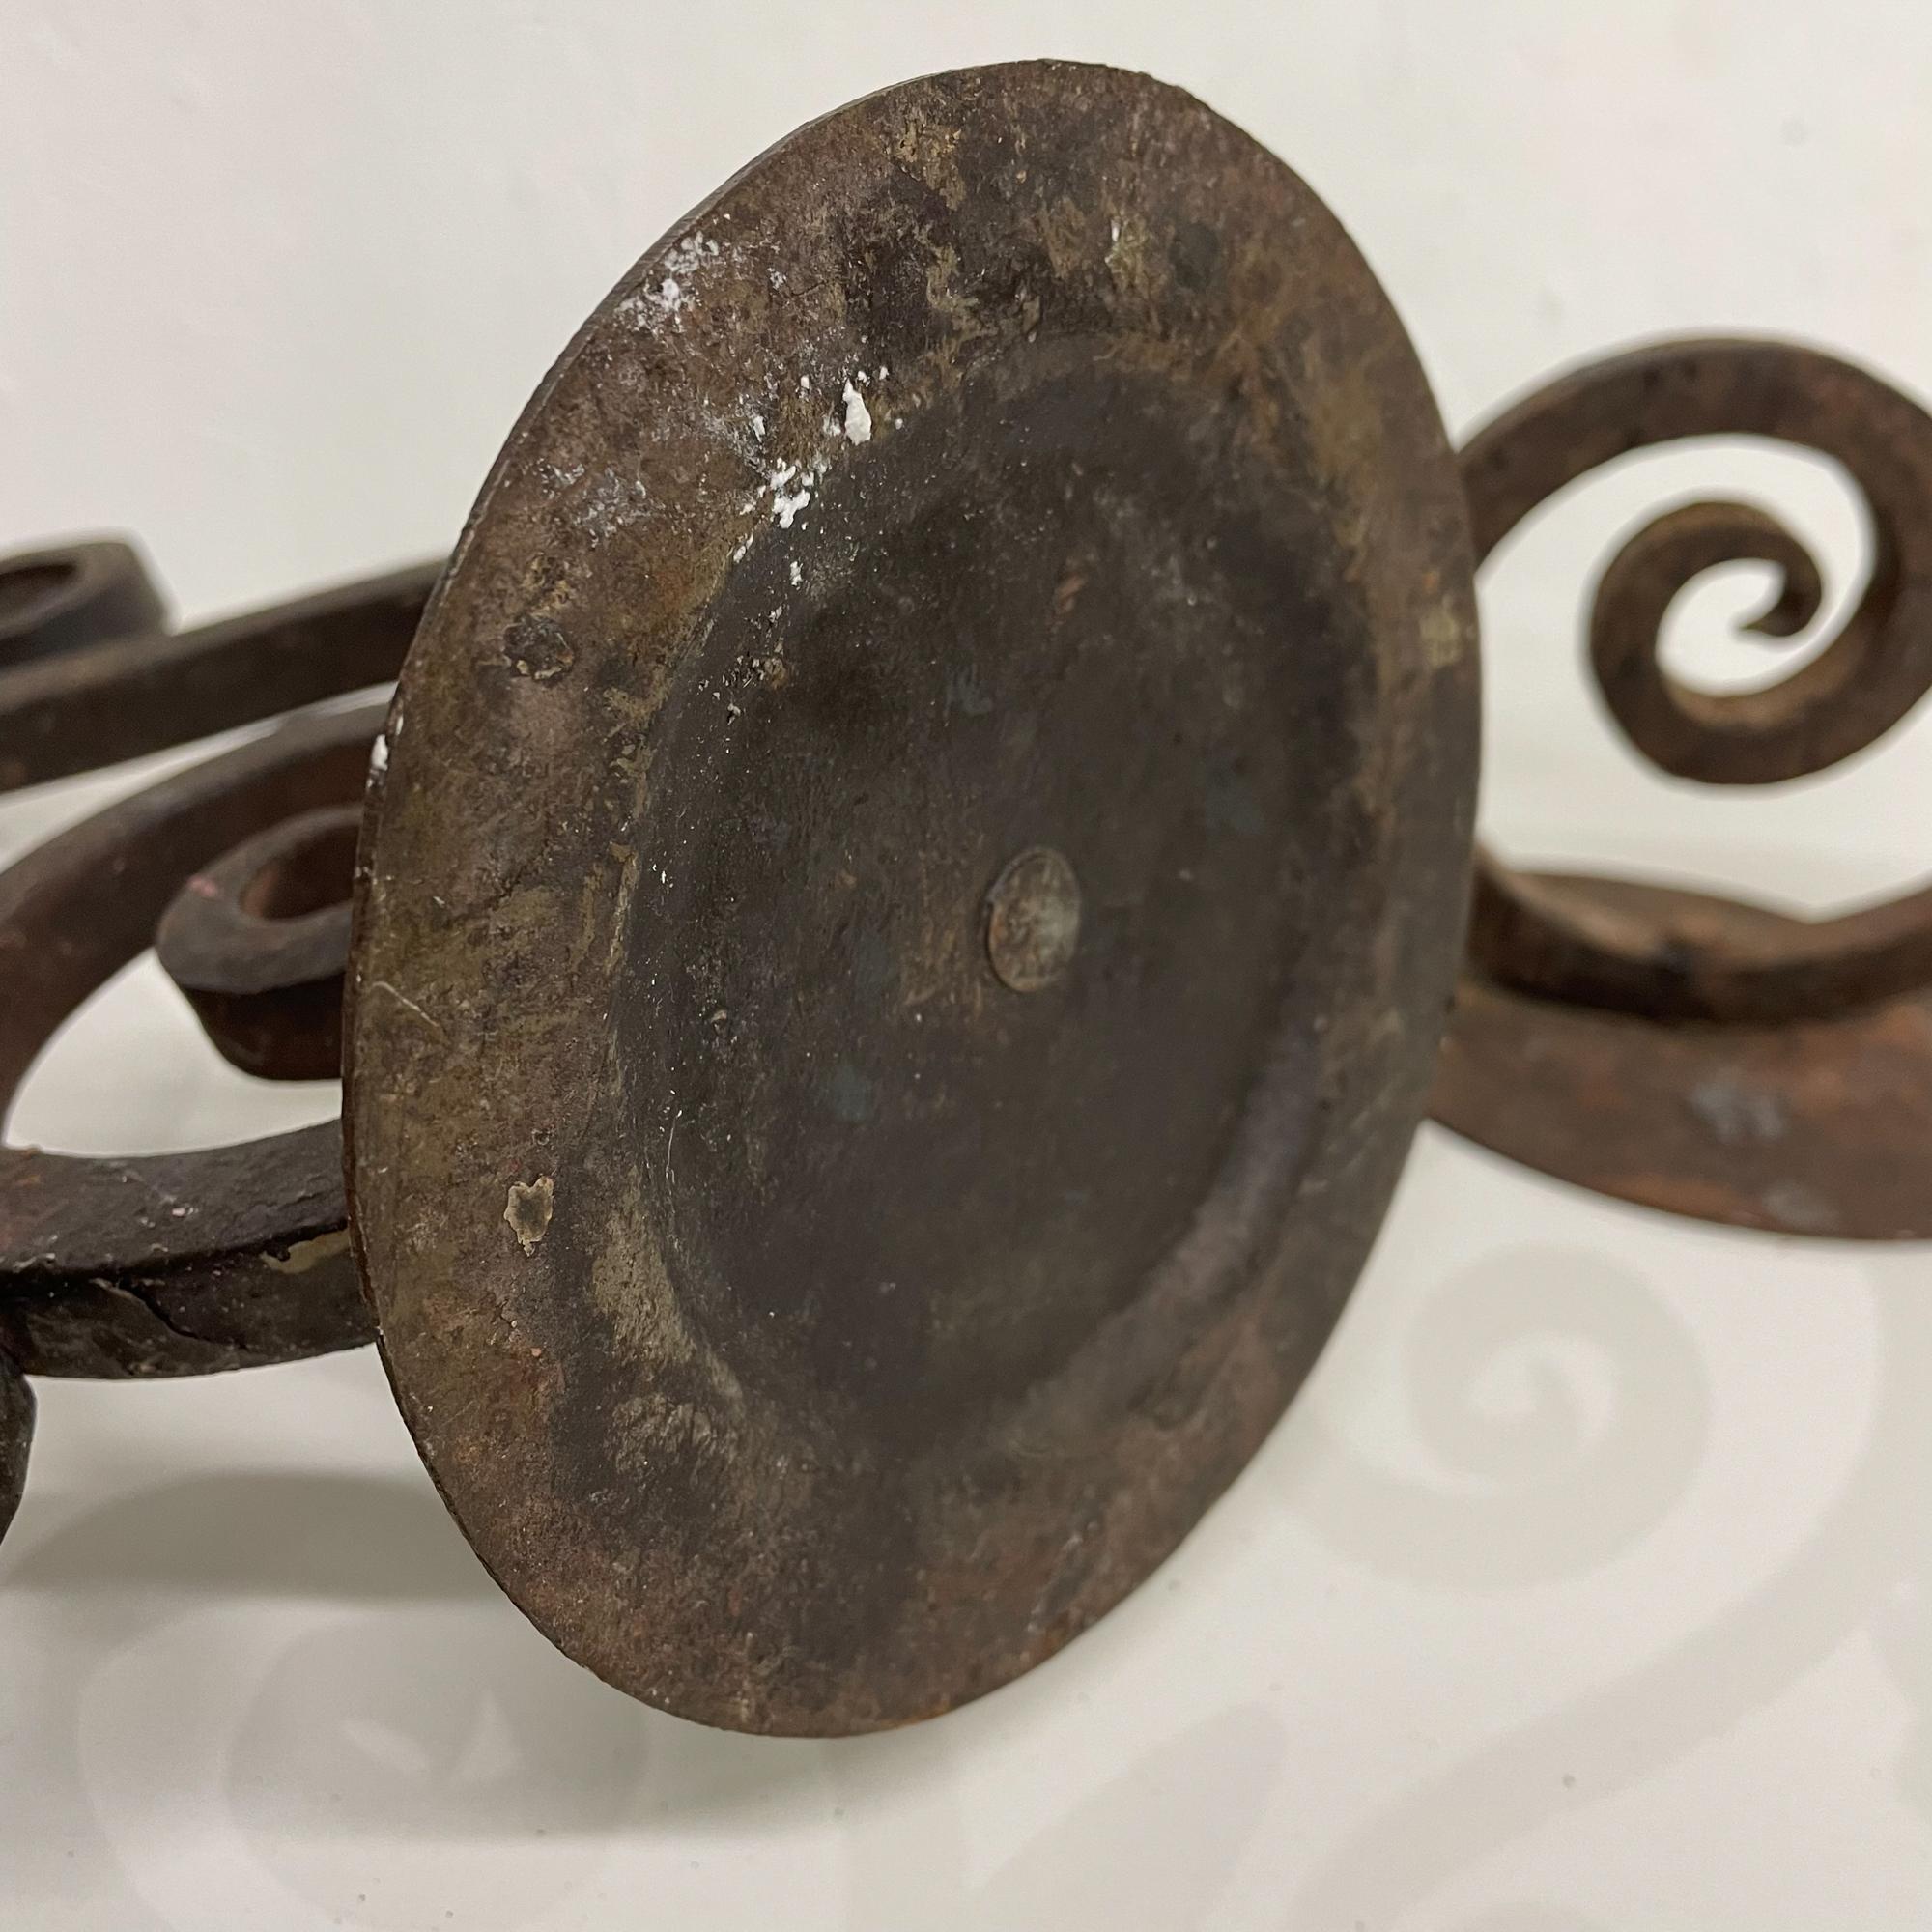 Spain Forged Iron Candelabra Pair + Three Arm Candle Holders Rustic Scroll 1940s In Good Condition For Sale In Chula Vista, CA